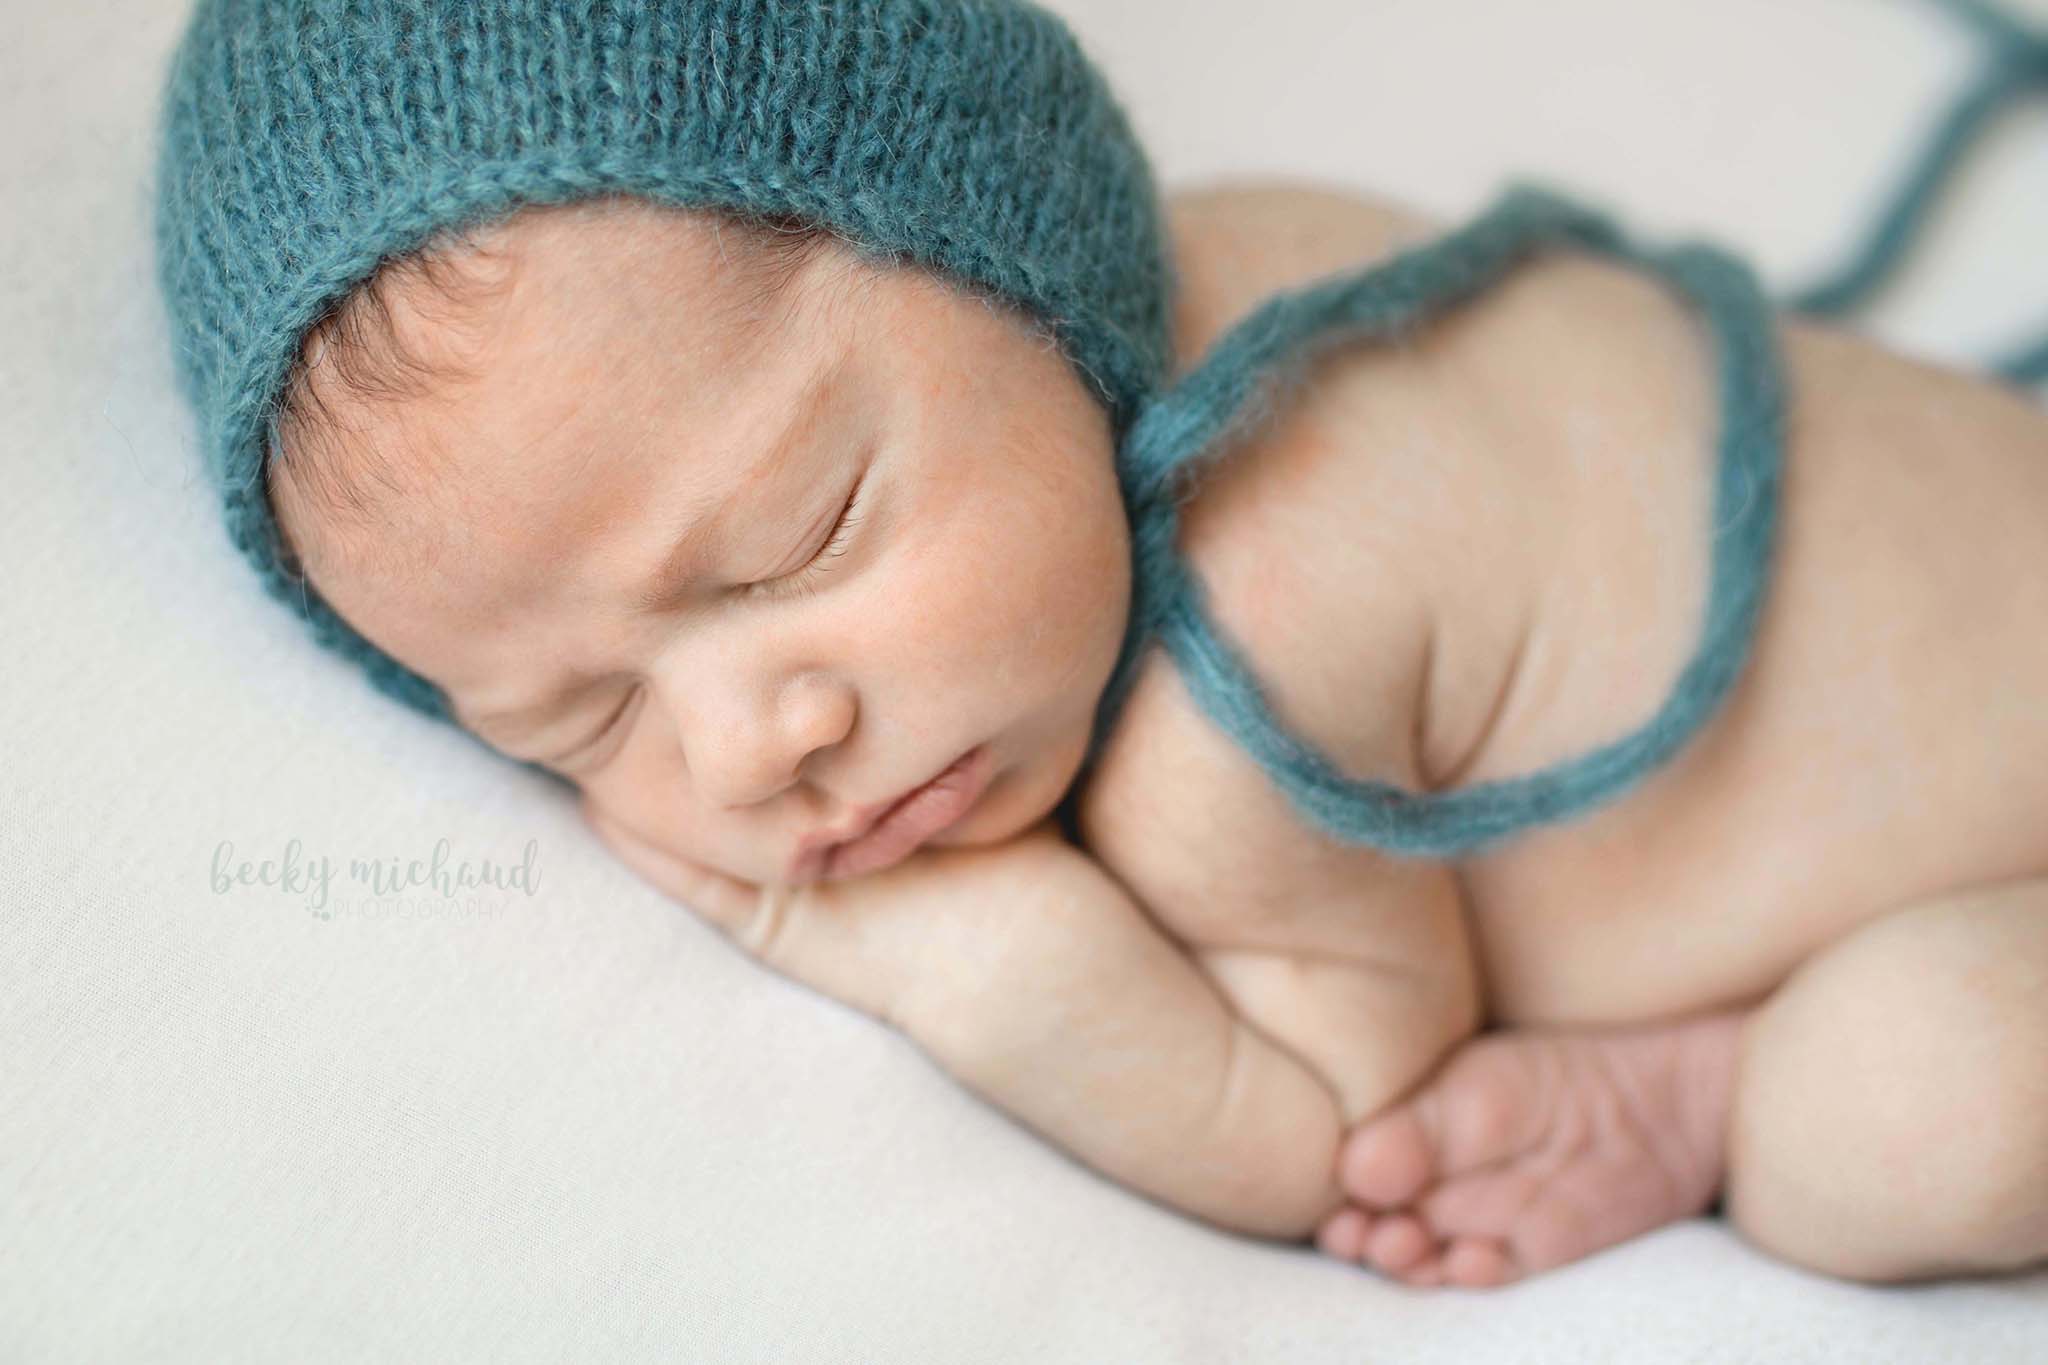 sweet and simple photo of a newborn boy wearing a blue hat